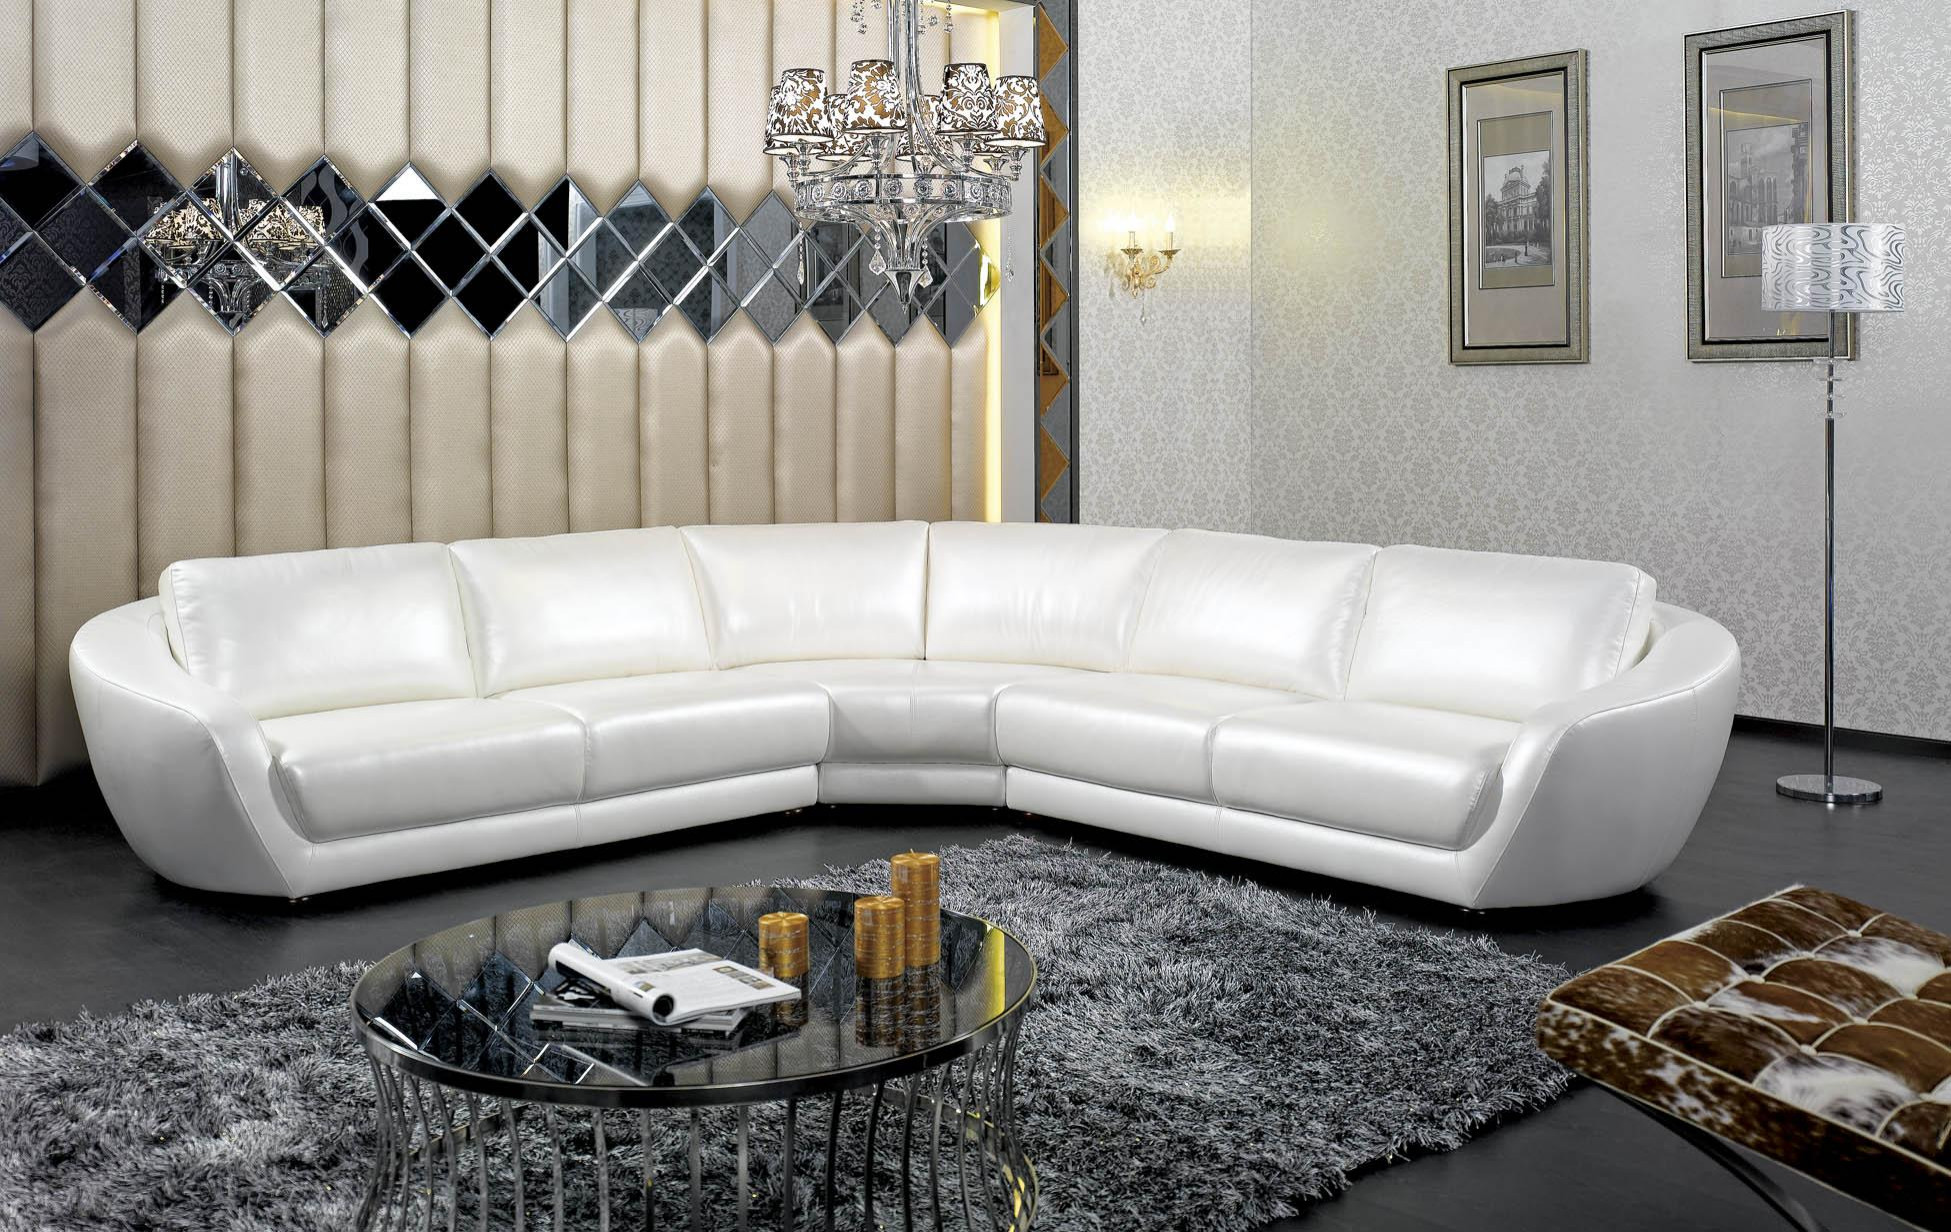 White Leather Couch Houzz, Contemporary White Leather Couches